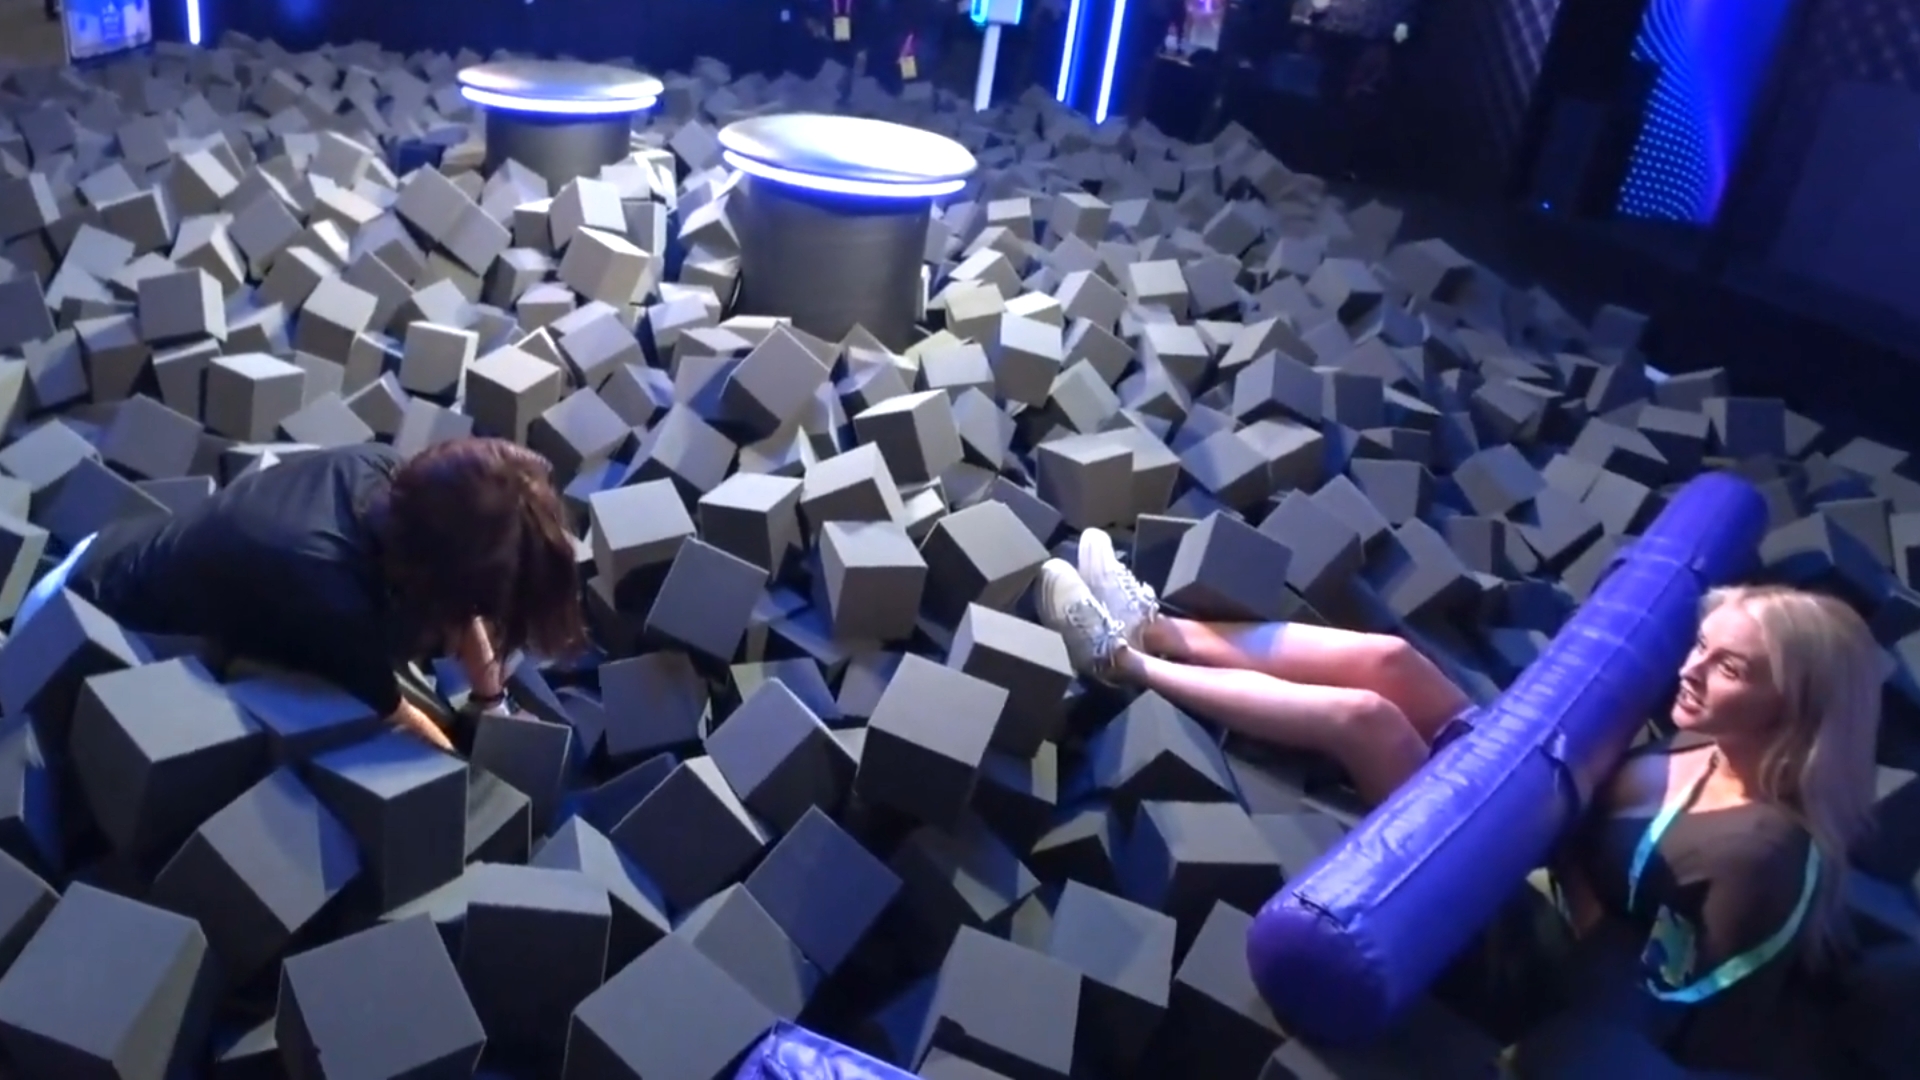 Twitch streamer injured her back in 2 places after diving into a foam pit at TwitchCon, and 2 others reported injuries from the same booth